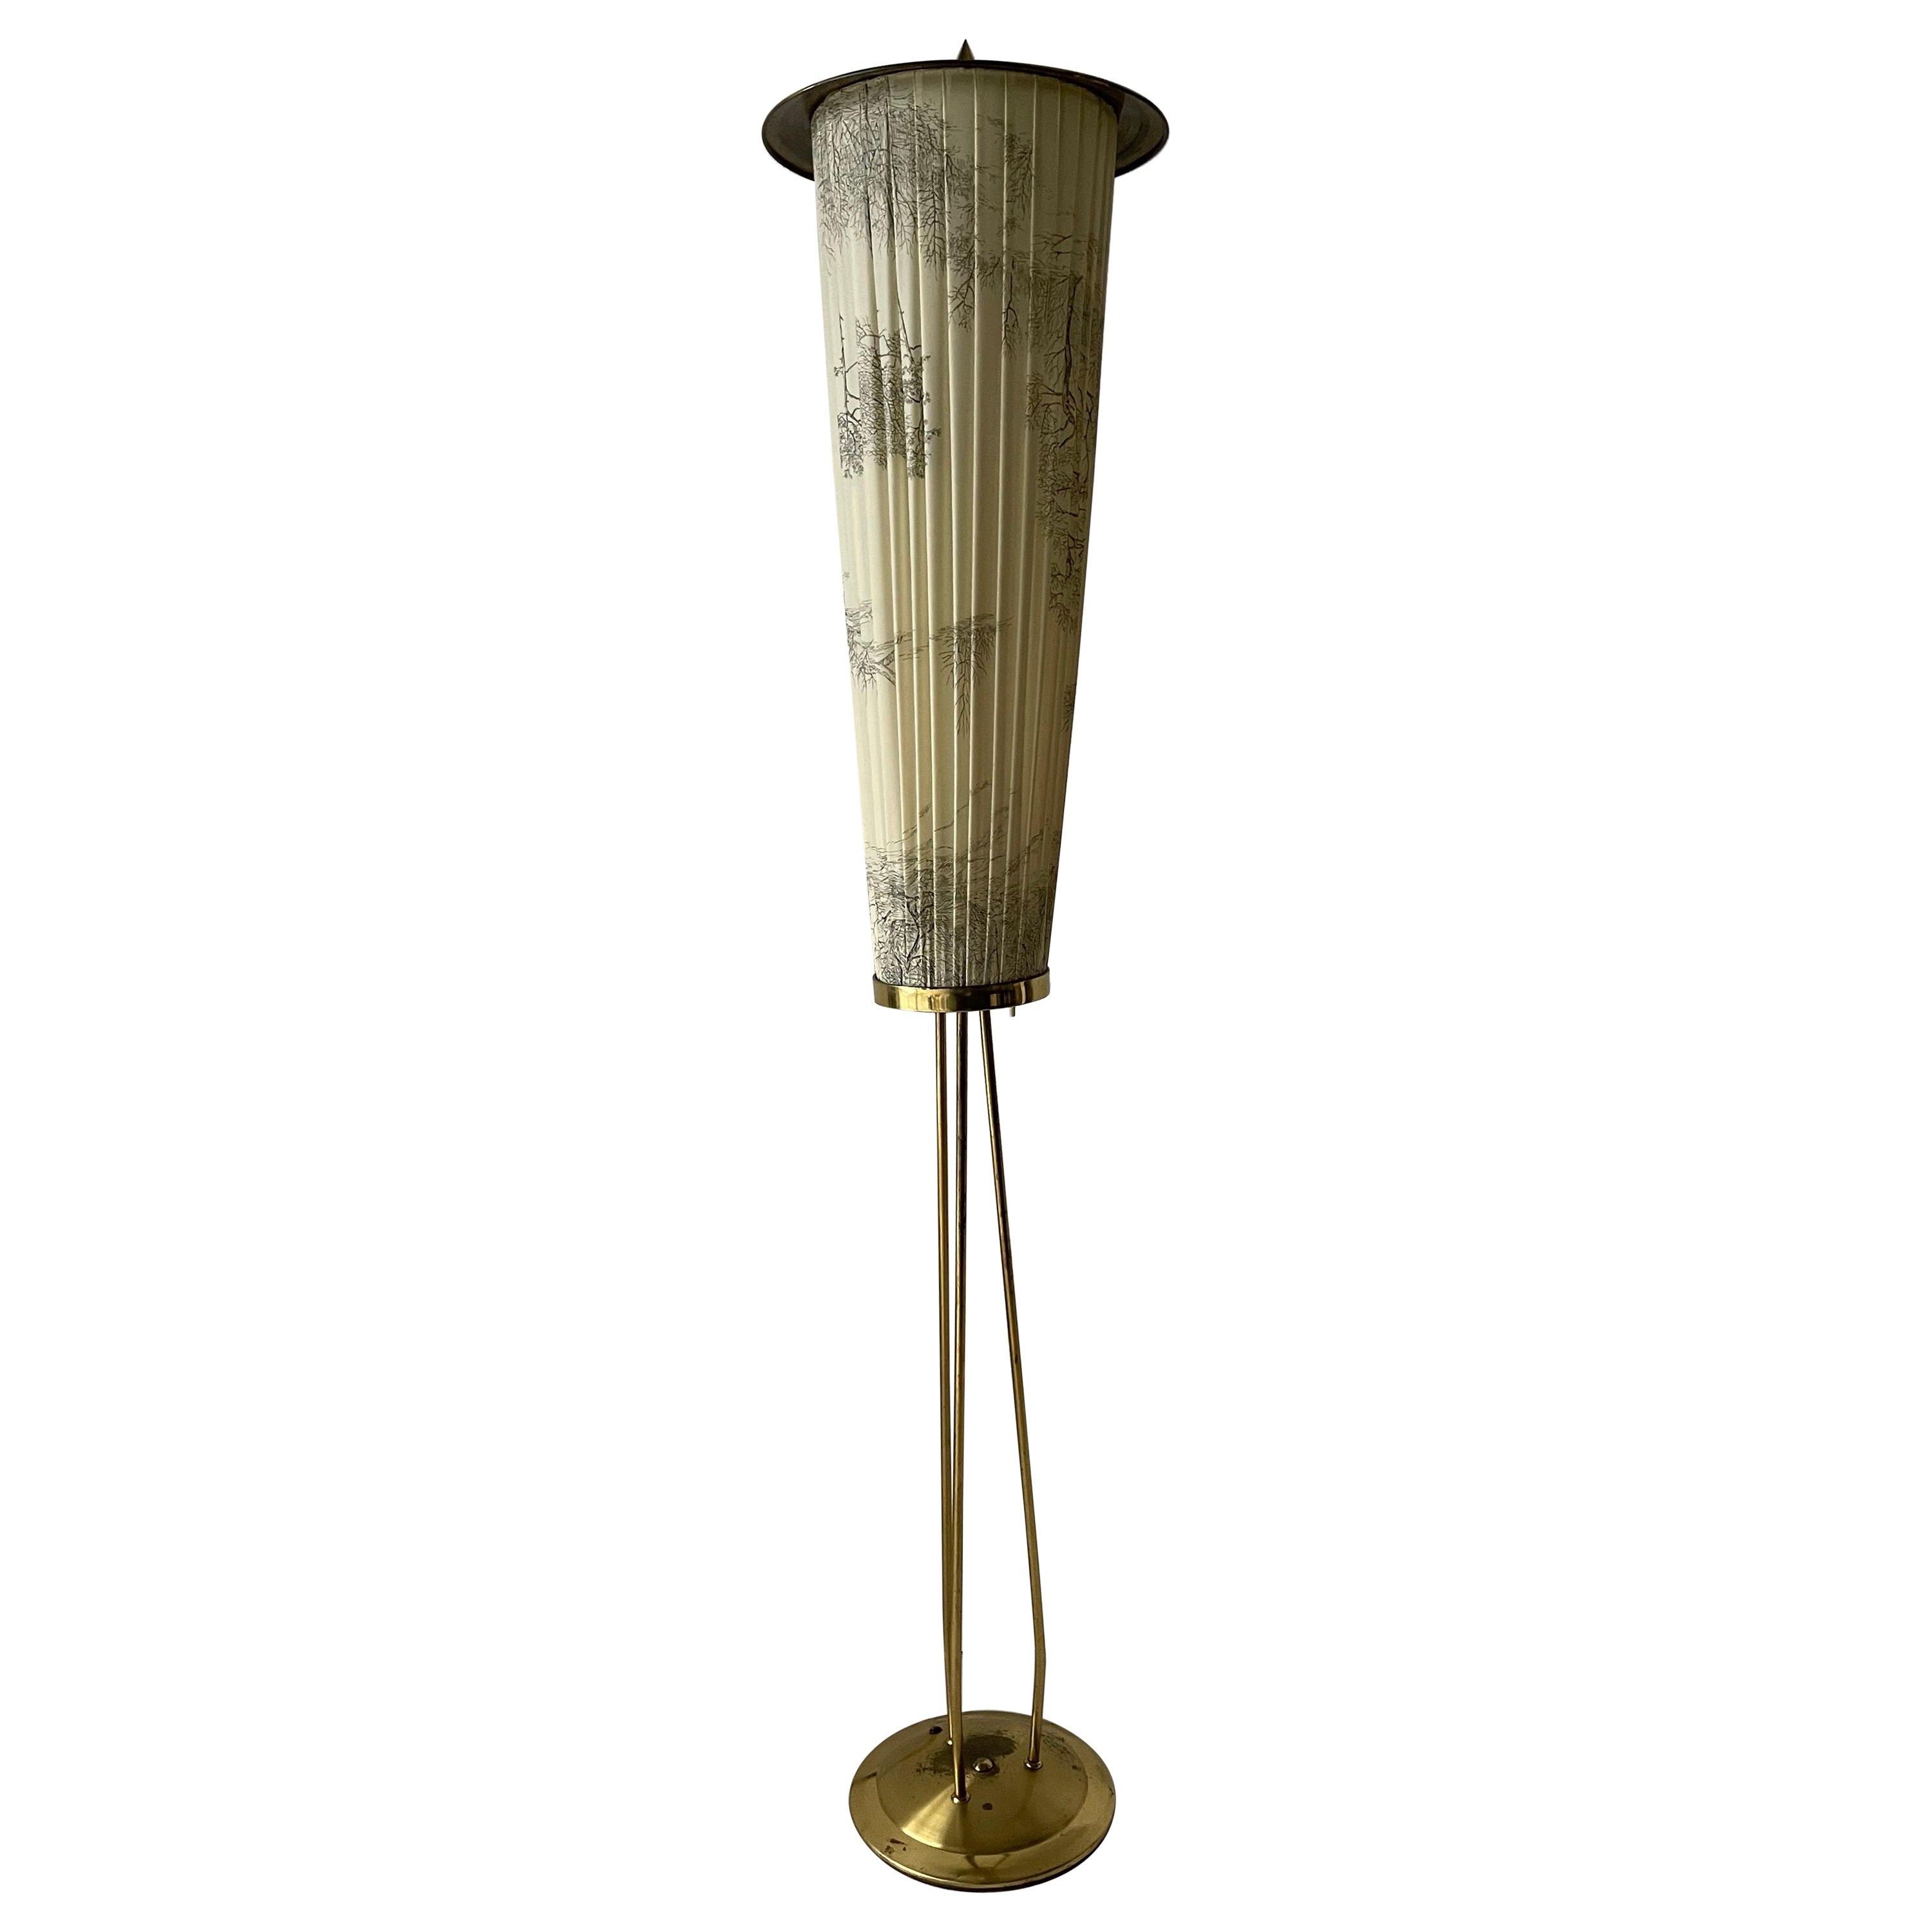 Mid-Century Modern Brass and Illustrated Fabric Floor Lamp, 1950s, Germany For Sale